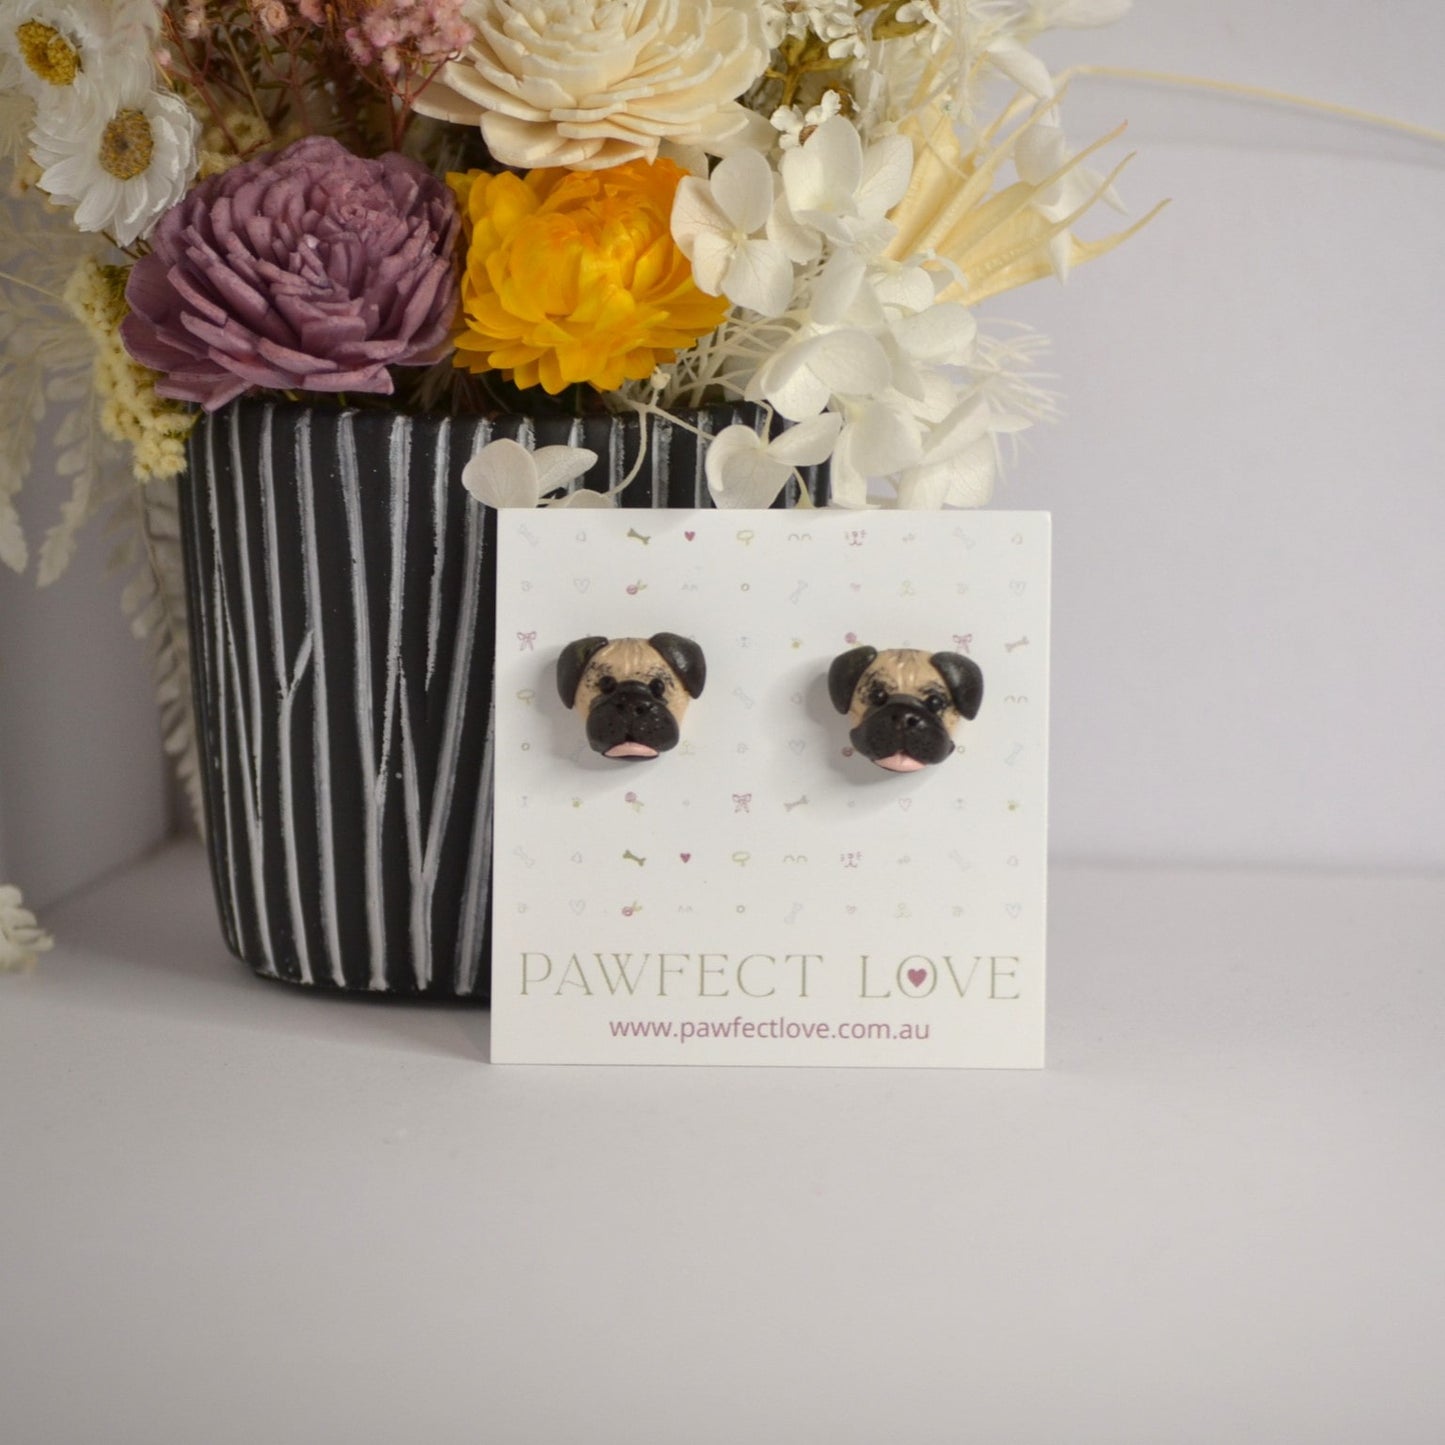 Handmade Pug stud earrings by Pawfect Love, positioned in front of dried flower arrangement